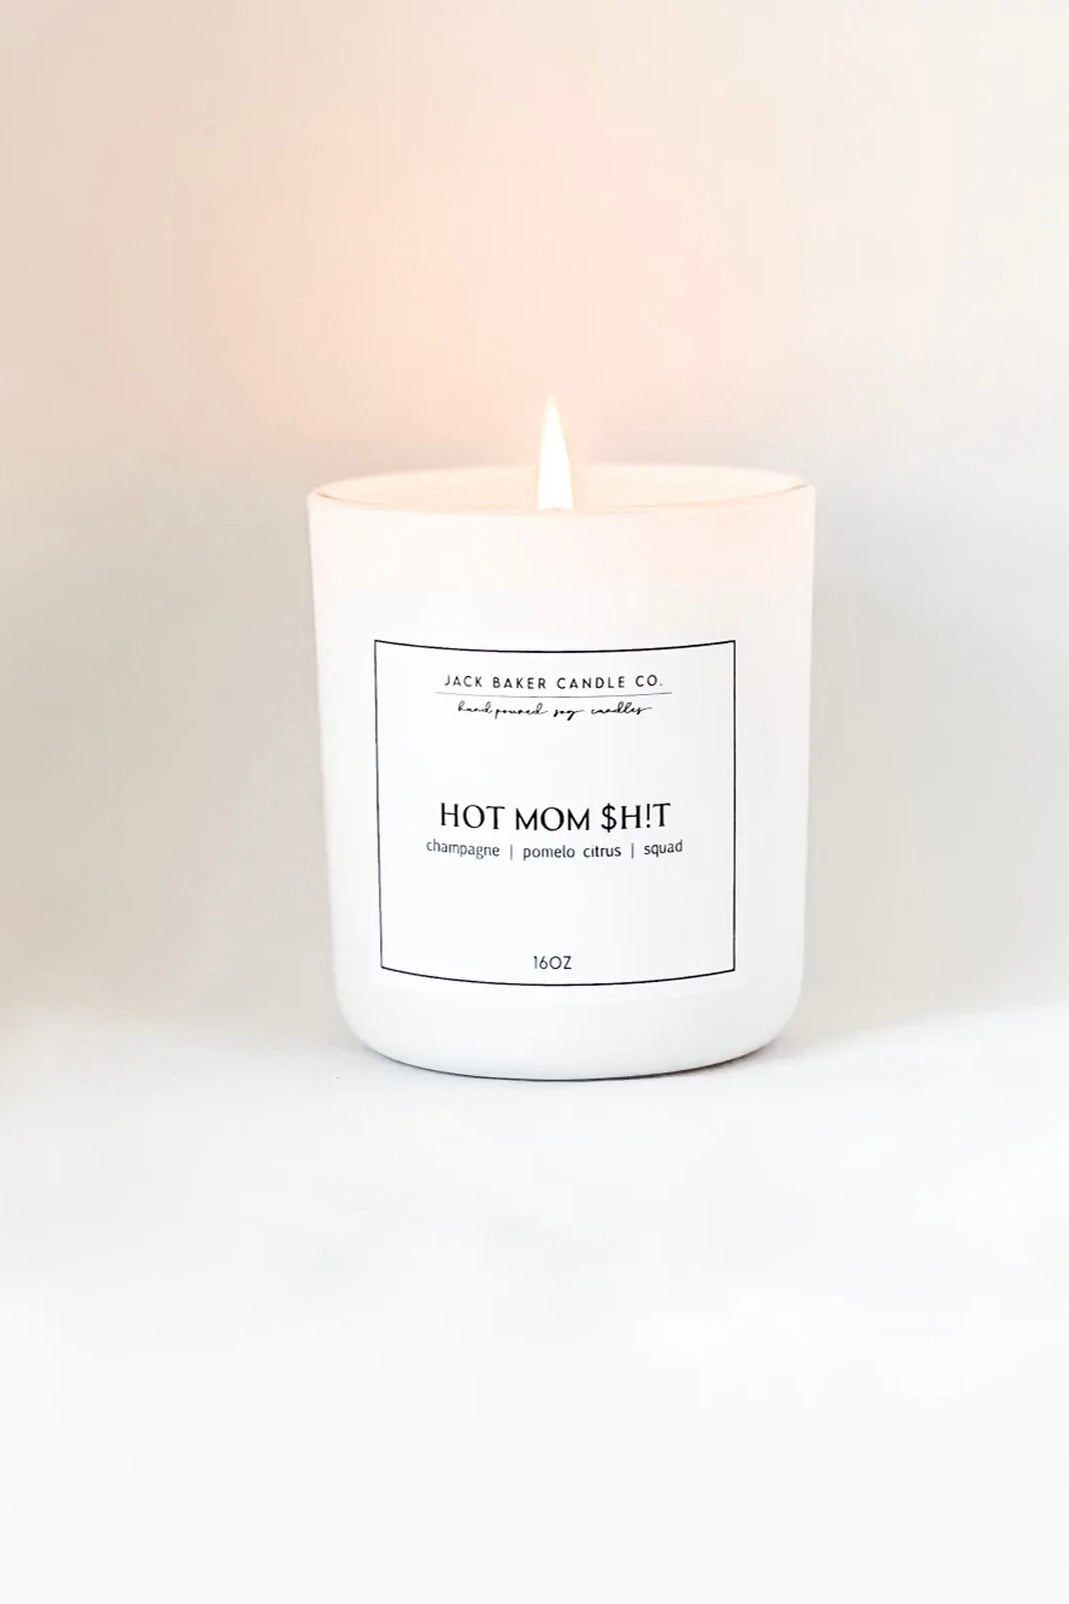 Hot Mom $h!T White Linen Collections Candle Jack Baker Candle Co